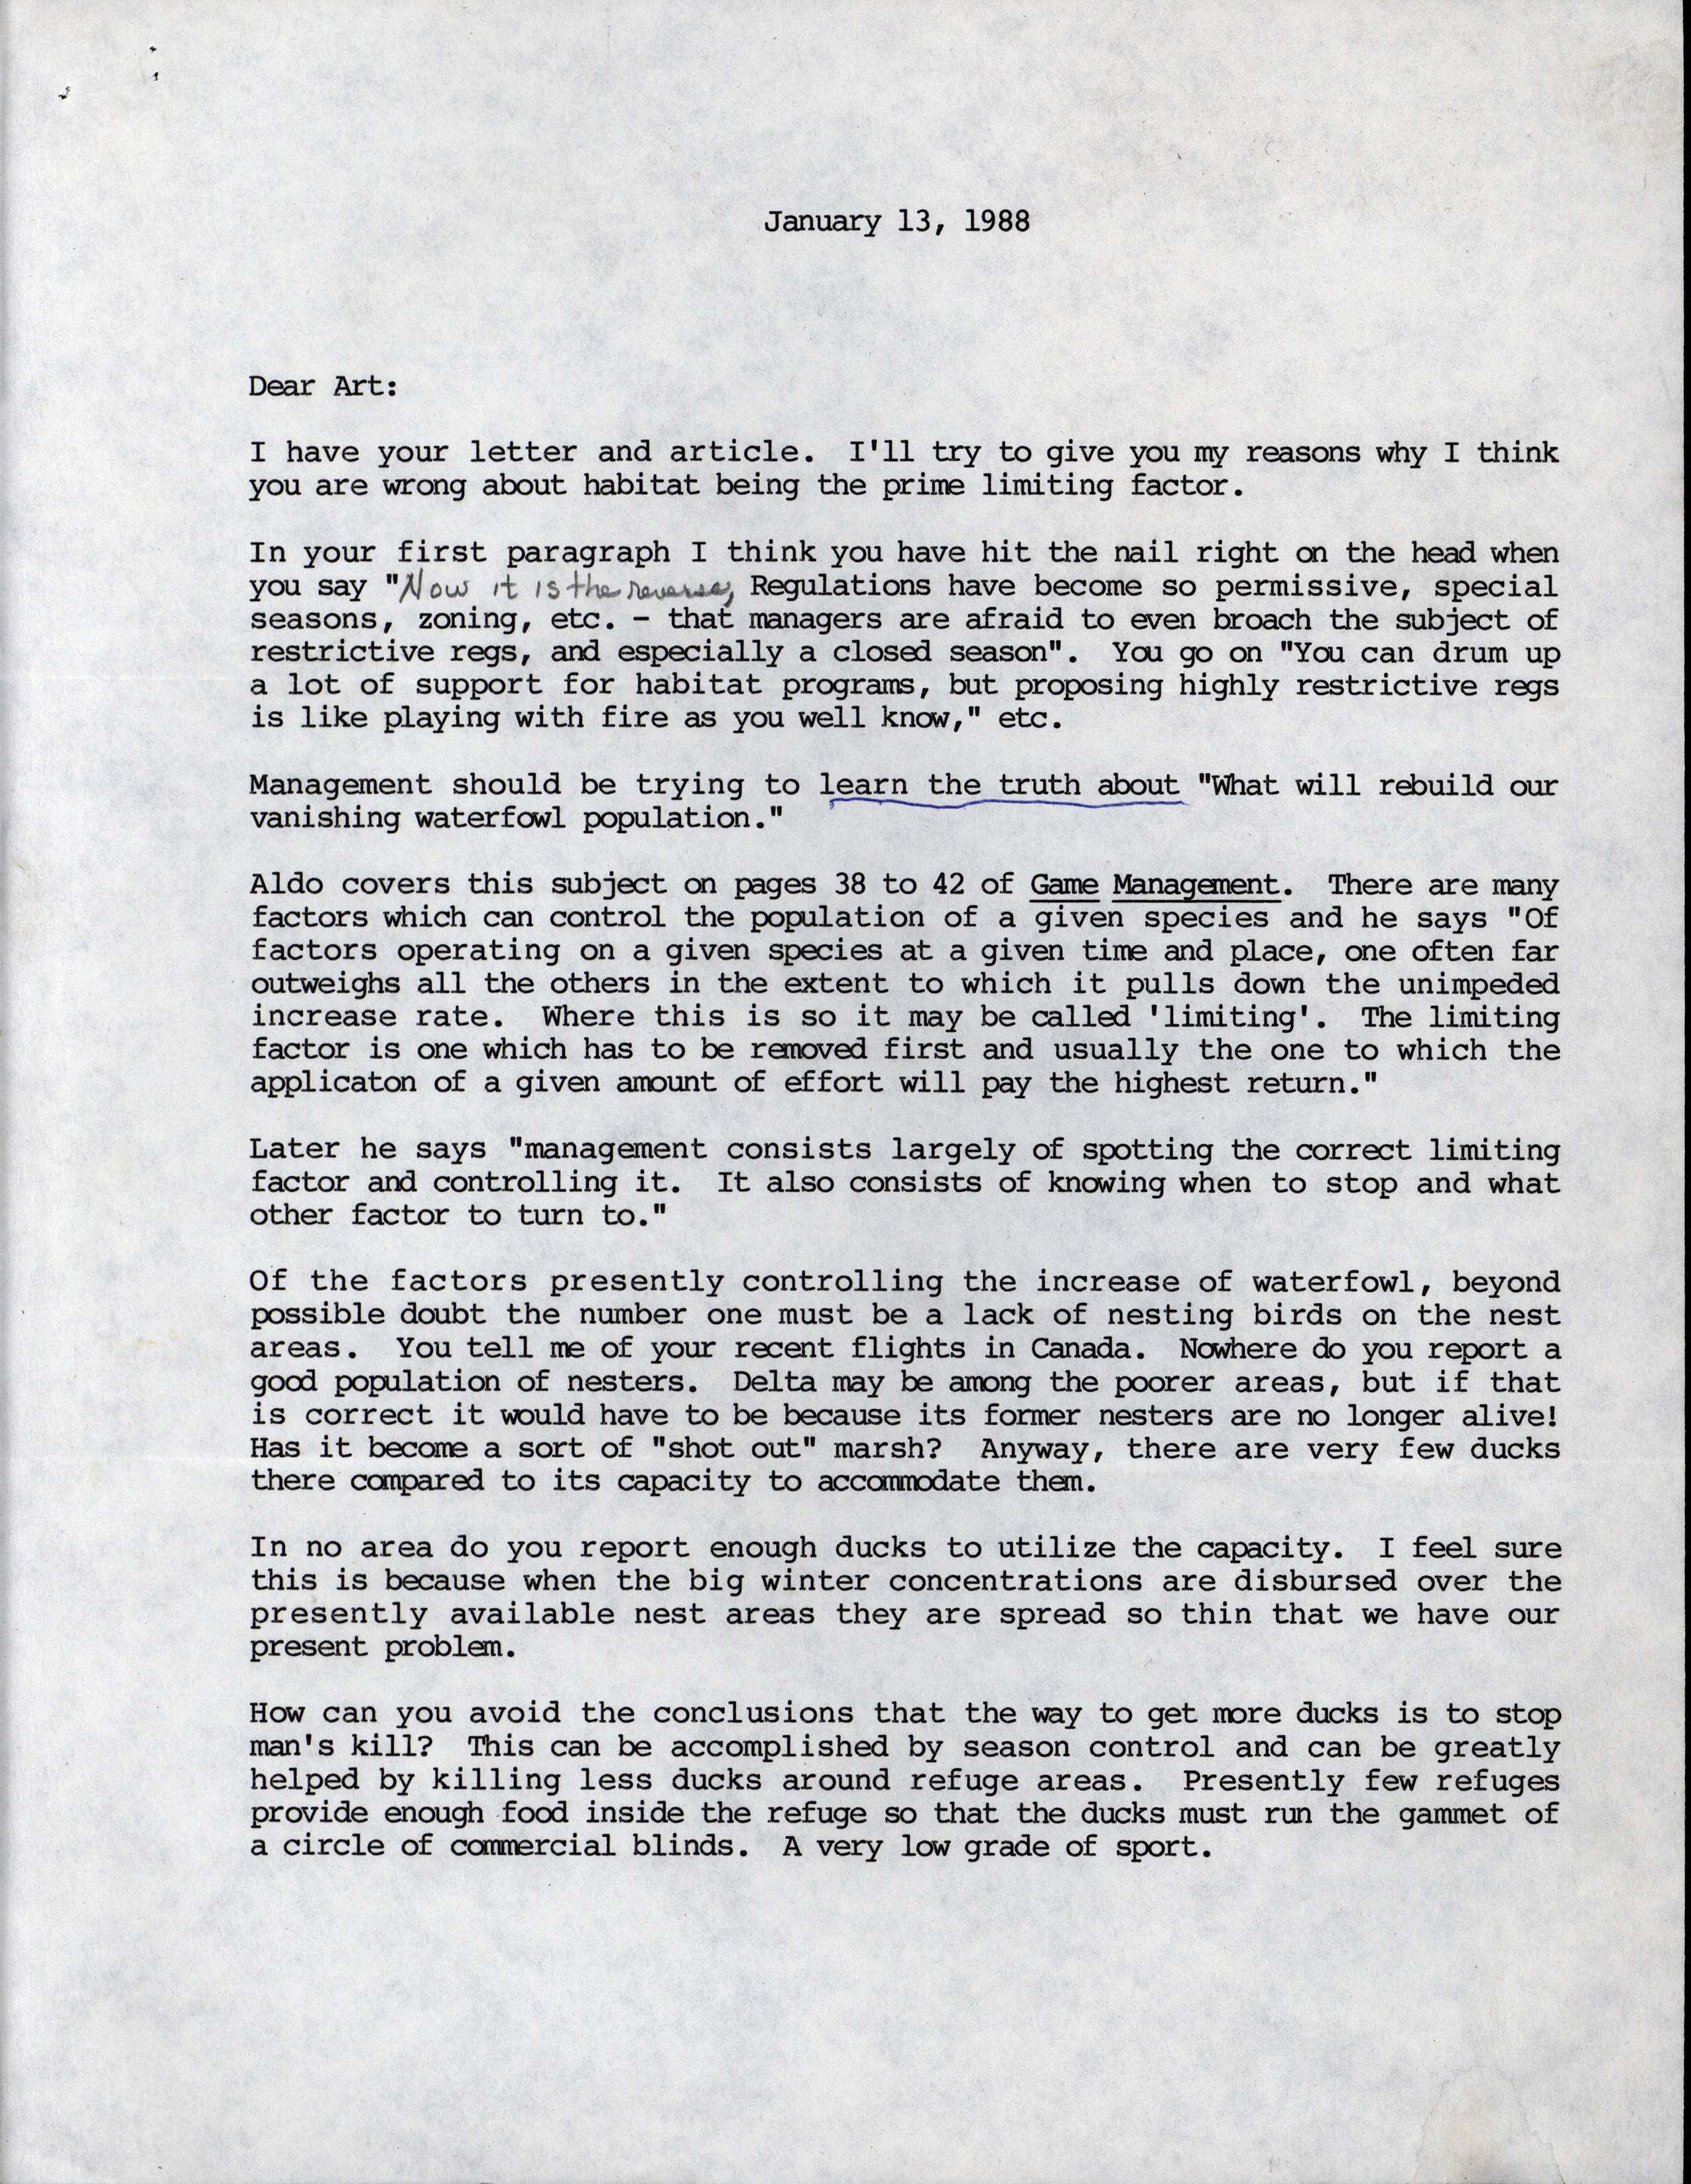 Frederic Leopold letter to A.S. Hawkins regarding hunting and the effect on duck populations, January 13, 1988